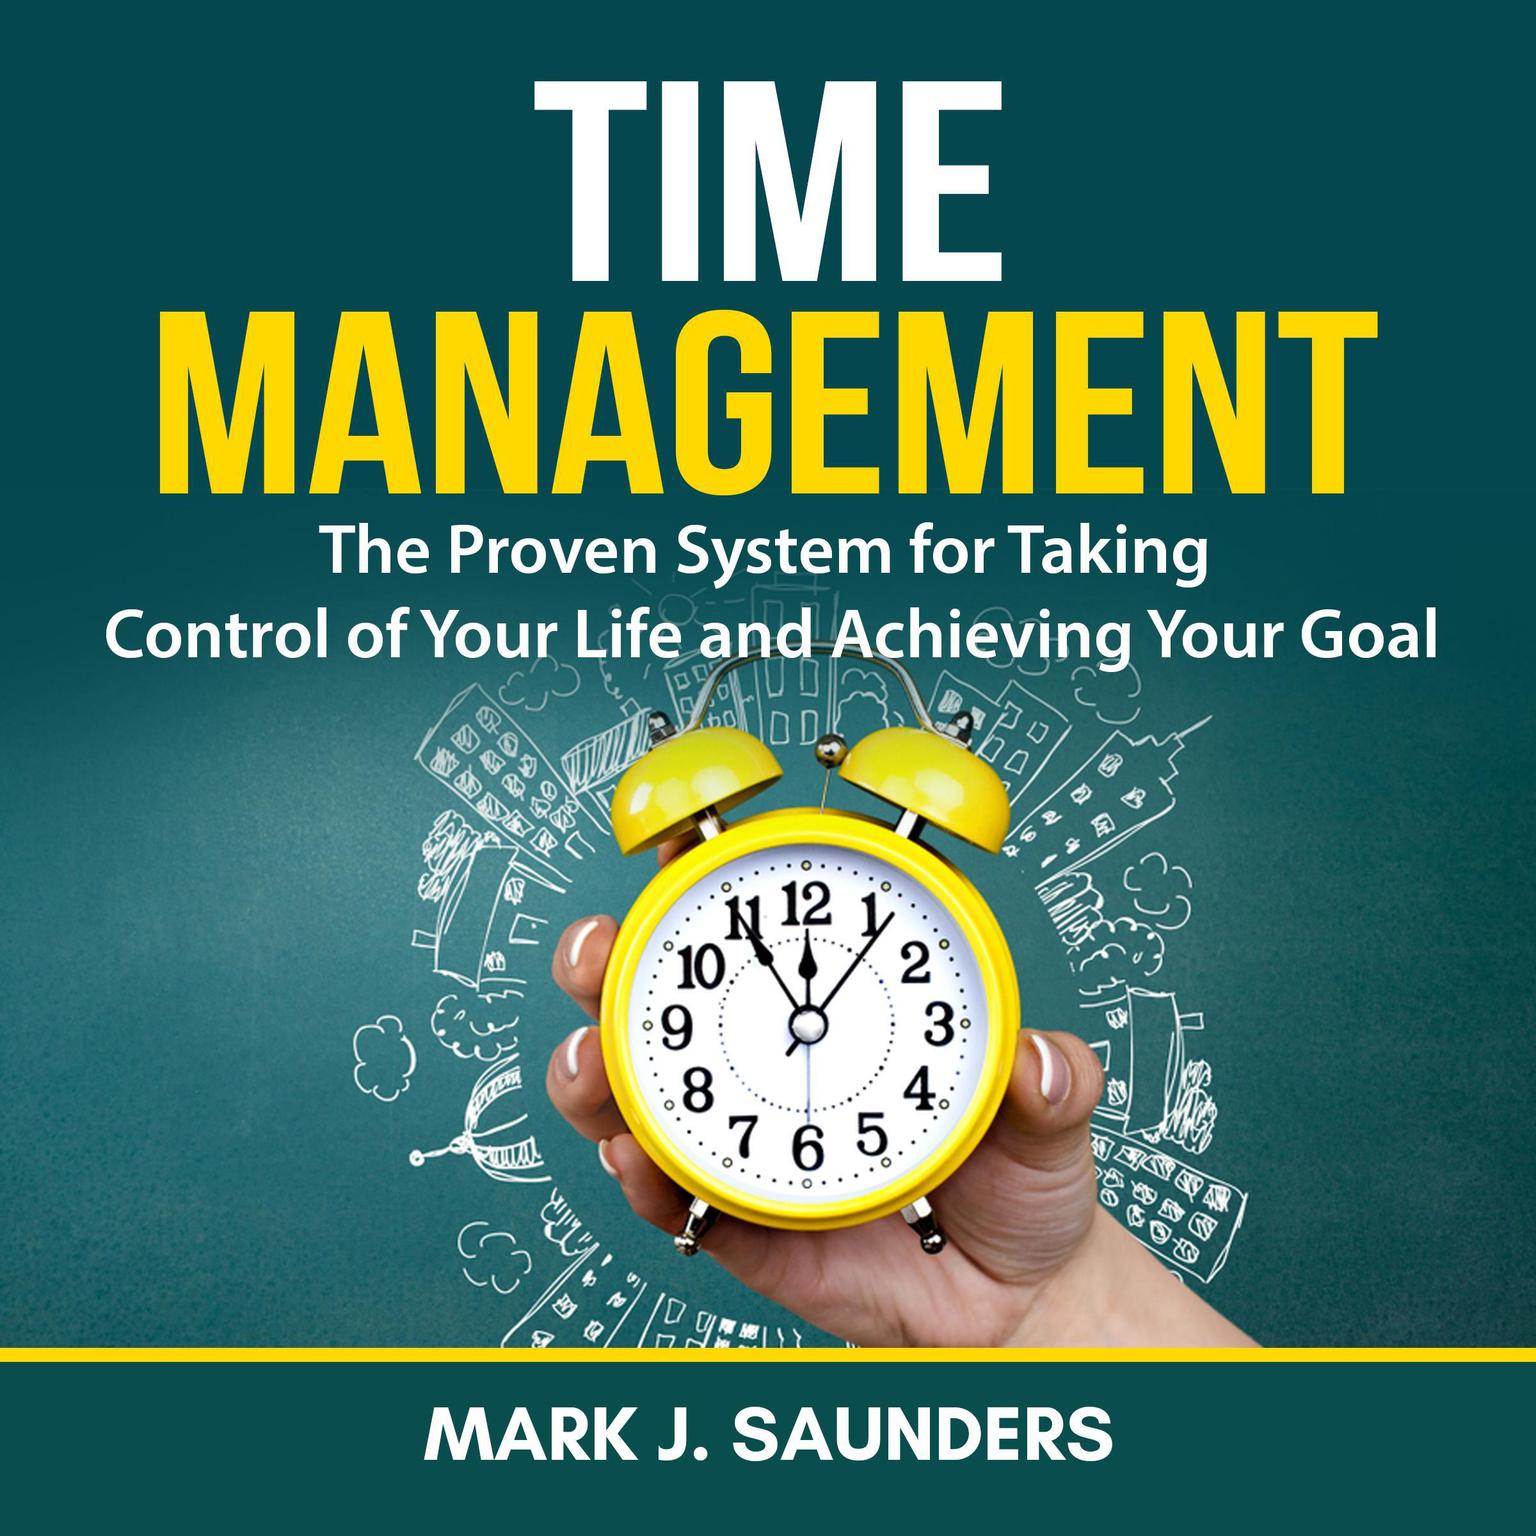 Time Management: The Proven System for Taking Control of Your Life and Achieving Your Goal Audiobook, by Mark J. Saunders